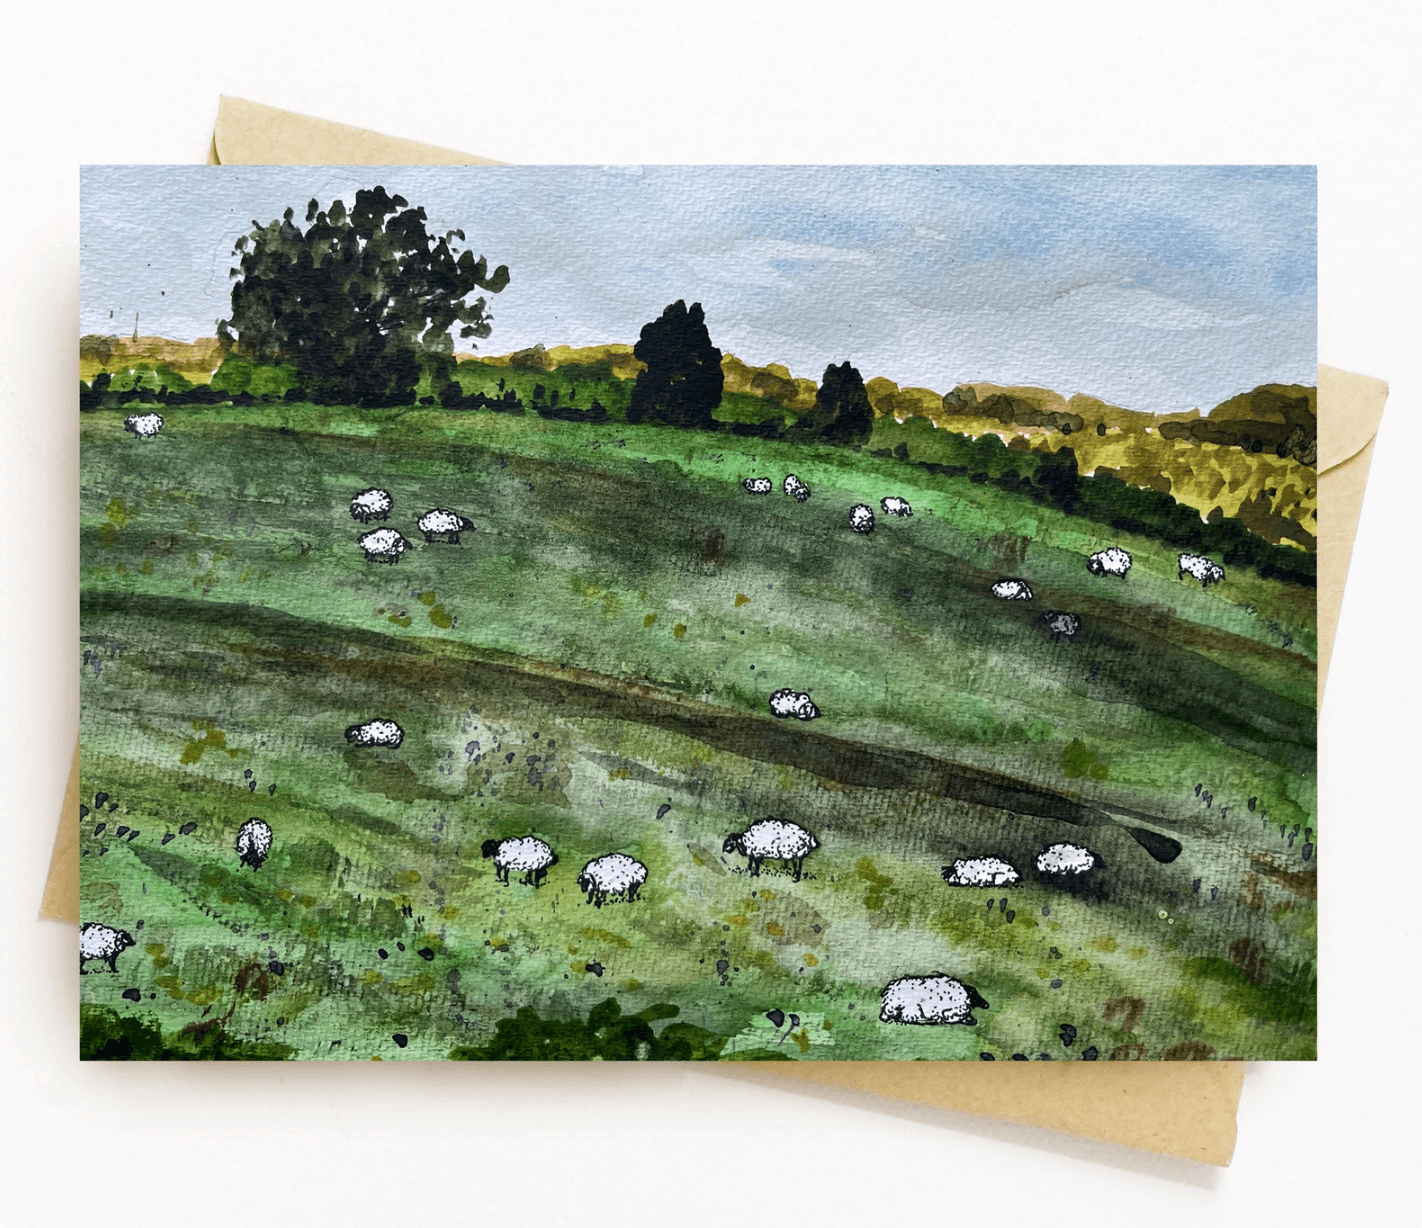 BellavanceInk: Greeting Card With Watercolor Of Sheep On A Hill 5 x 7 Inches - BellavanceInk